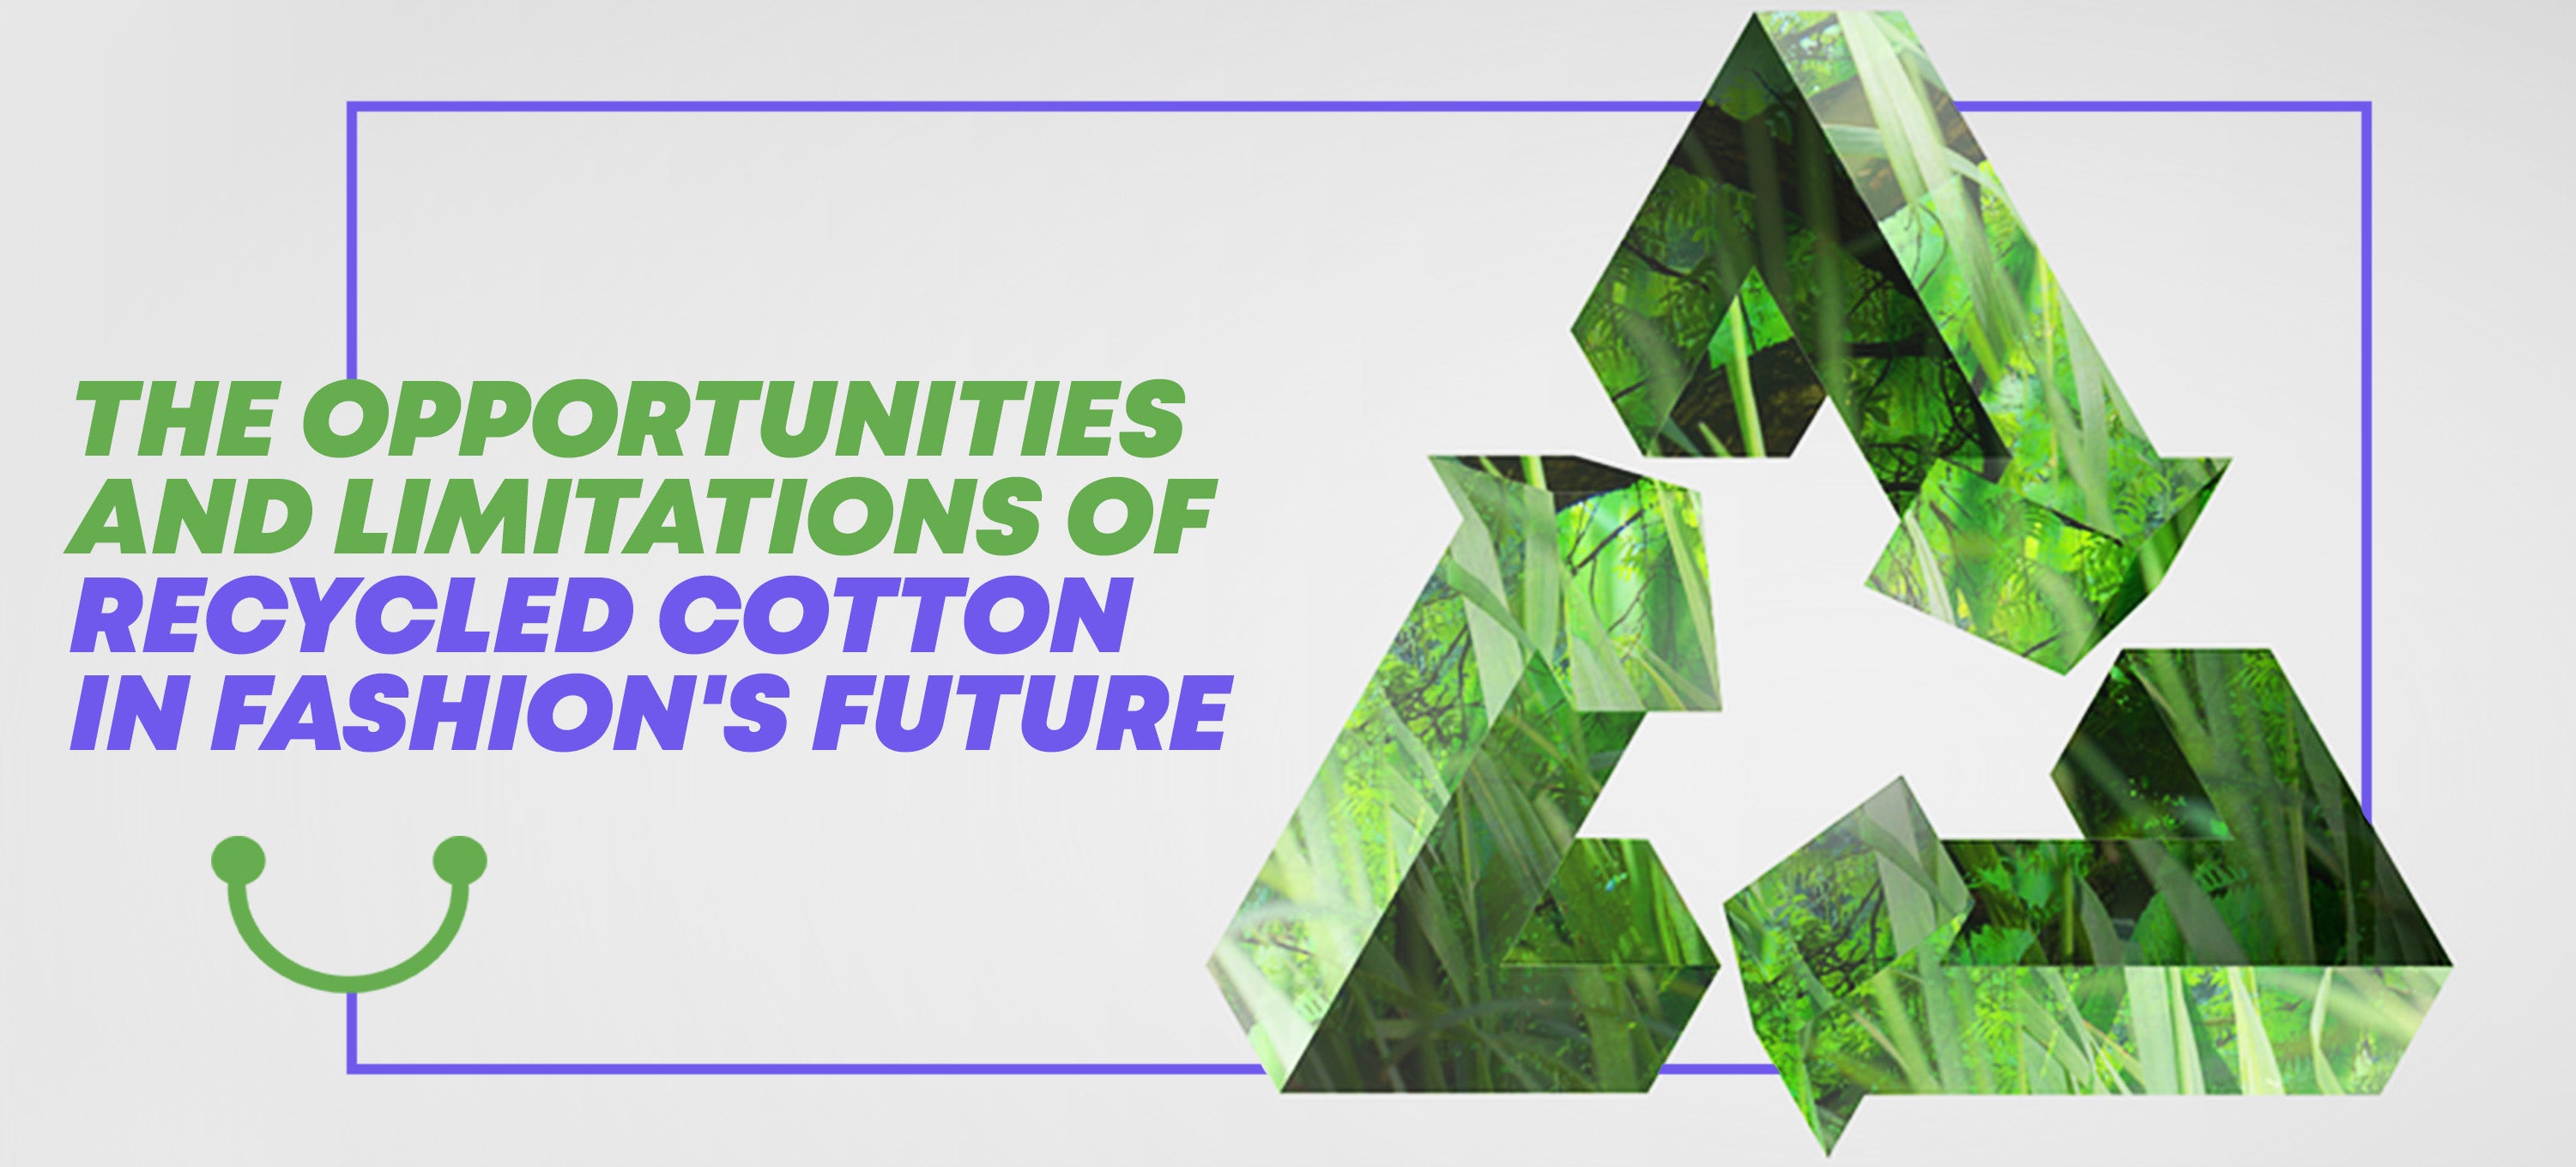 The Opportunities and Limitations of Recycled Cotton in Fashion